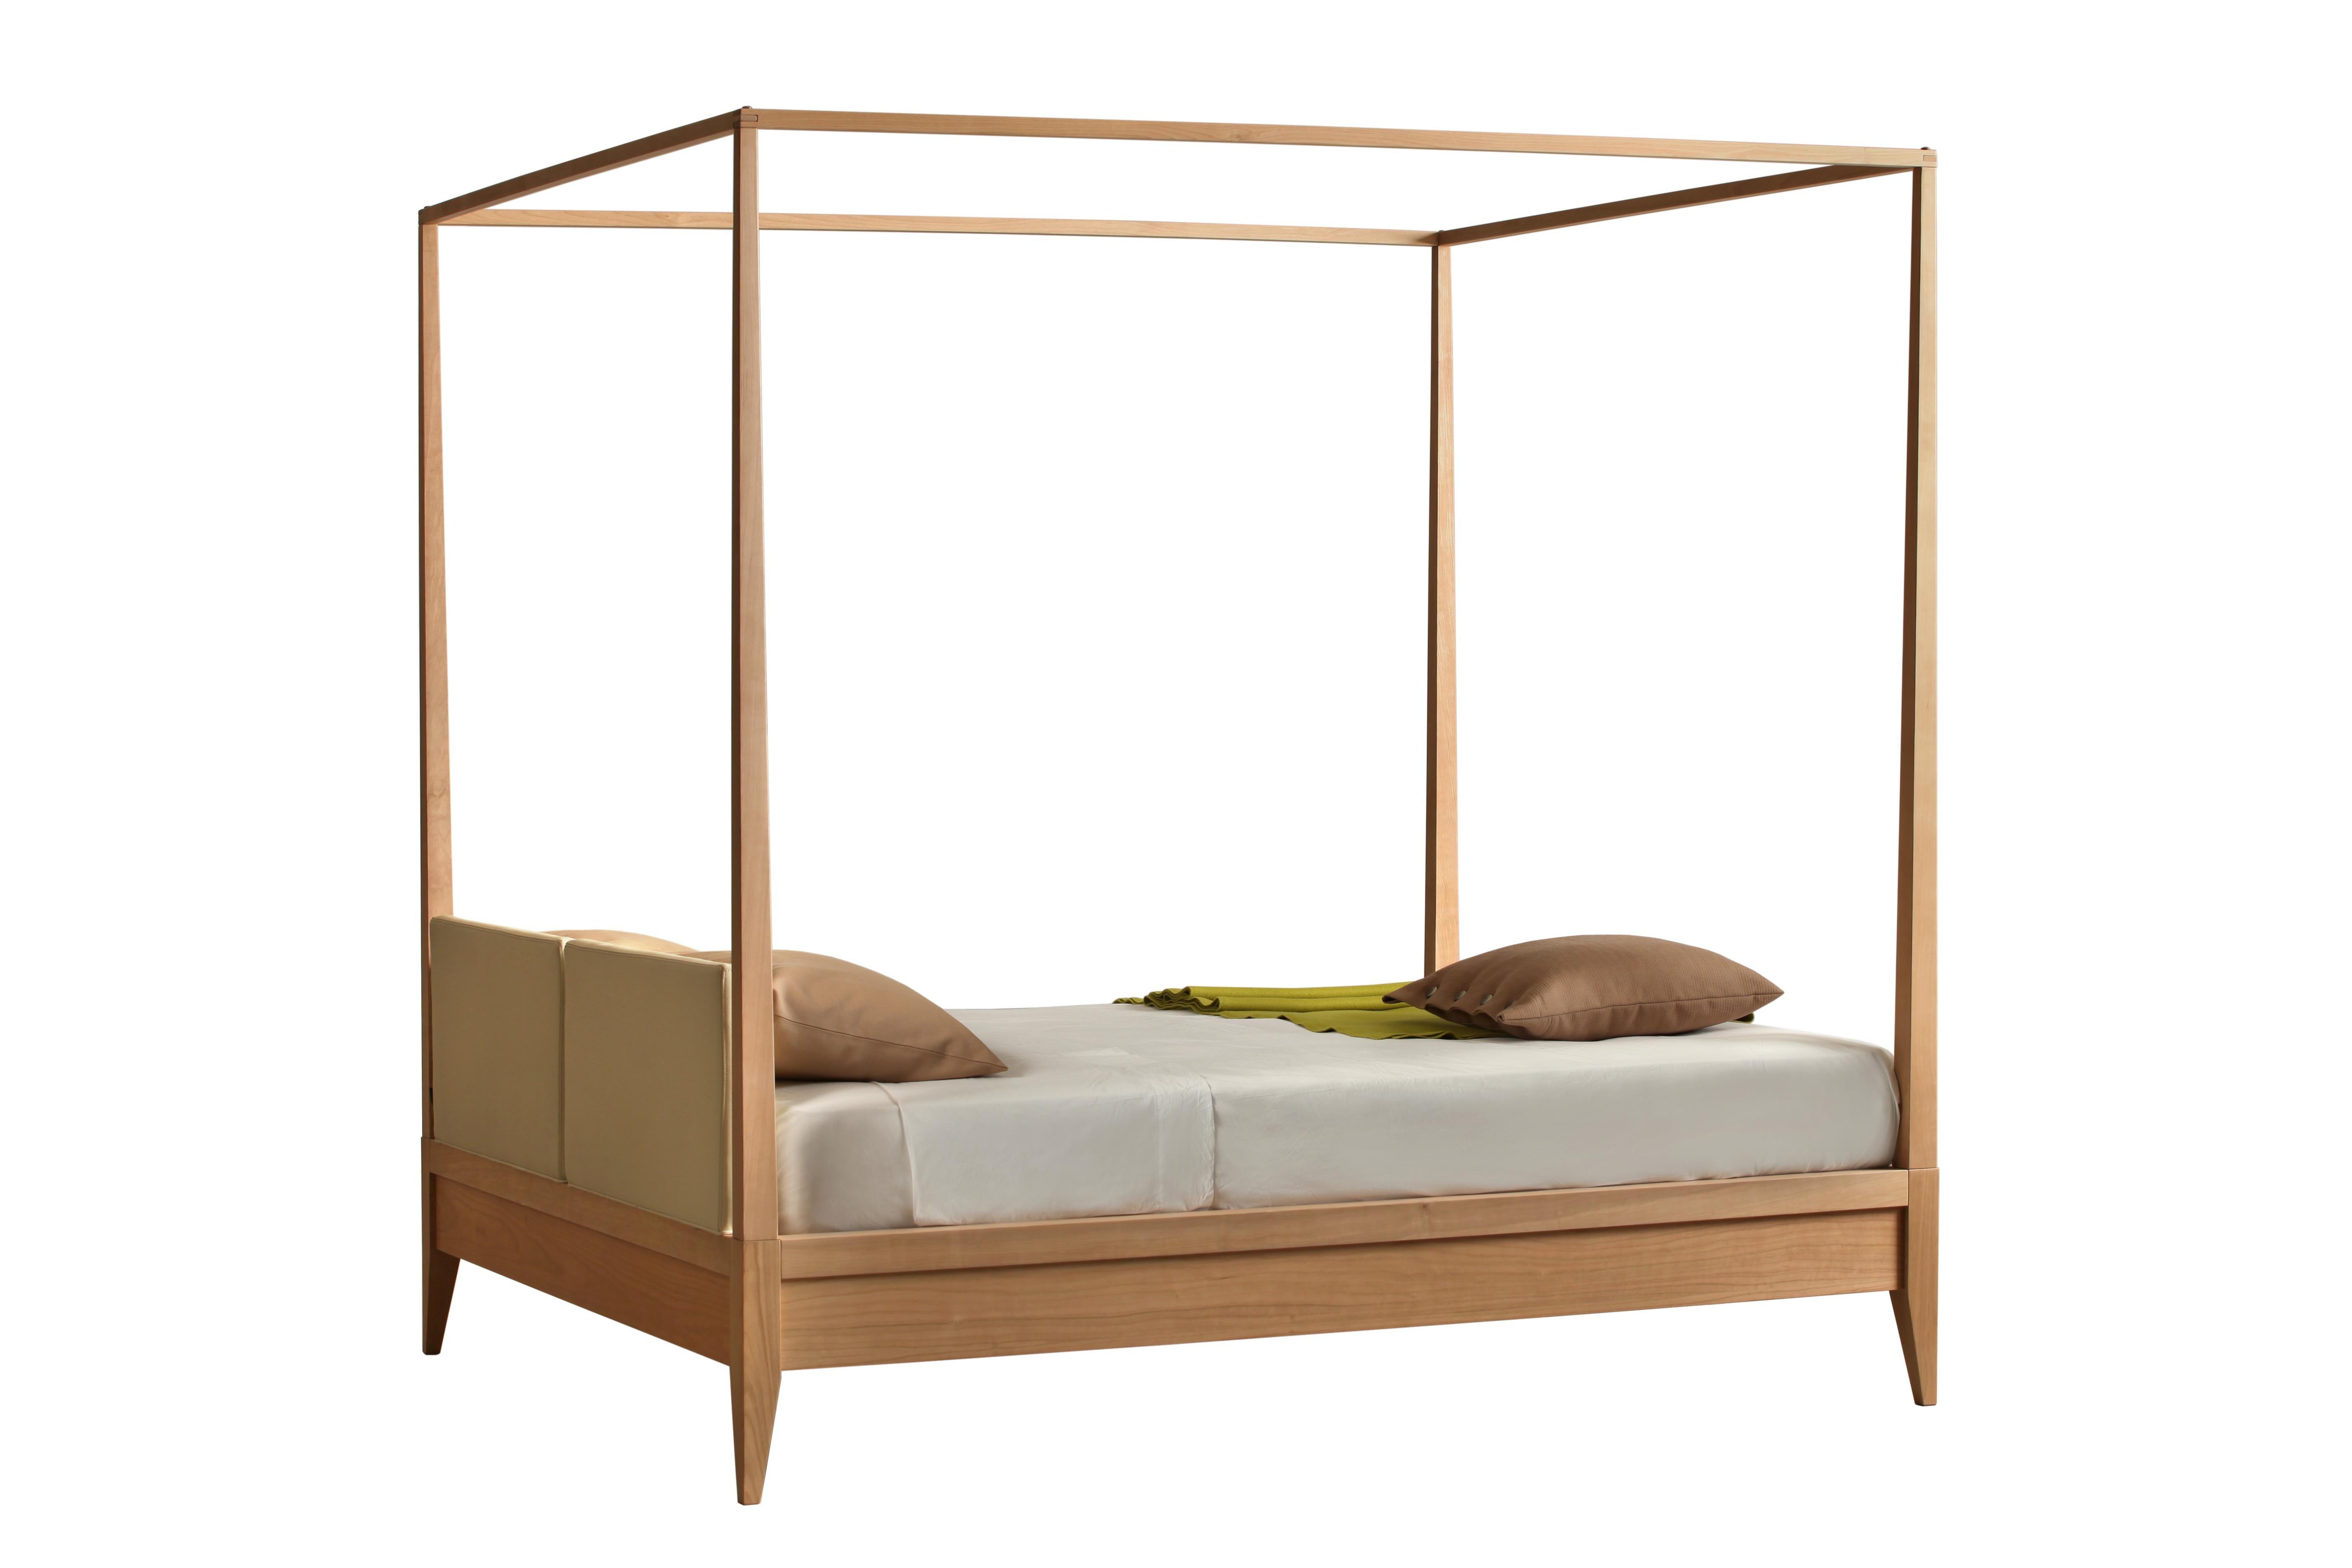 Italian Valentino Canopy Bed Made of Cherrywood with Upholstered Headboard, by Morelato